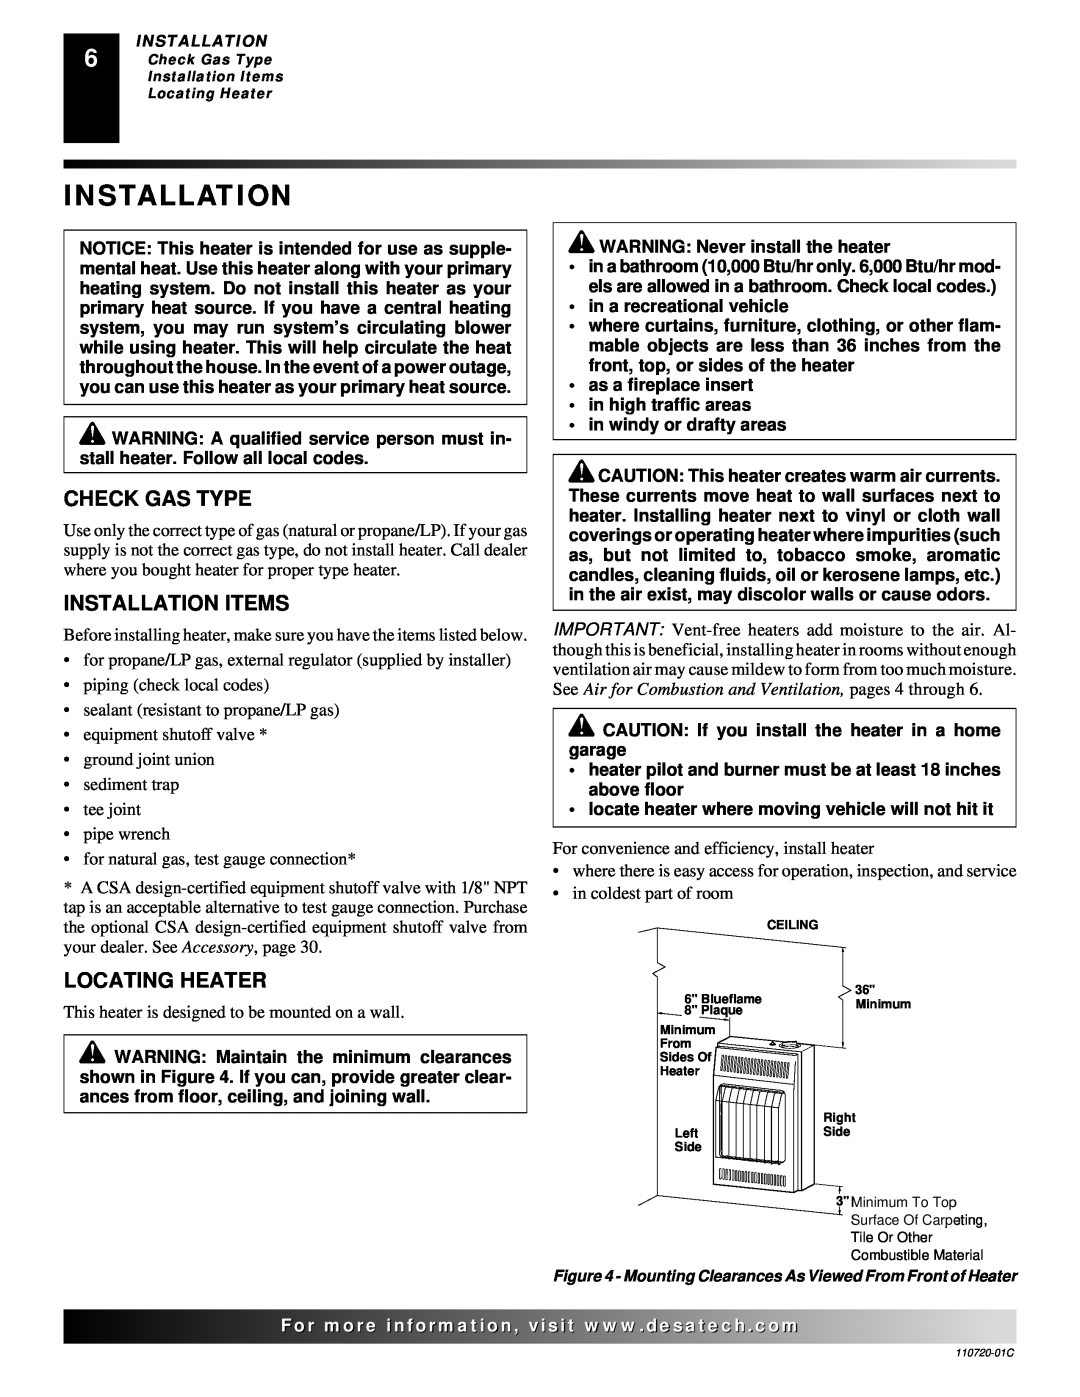 Desa VN10A installation manual Check Gas Type, Installation Items, Locating Heater 